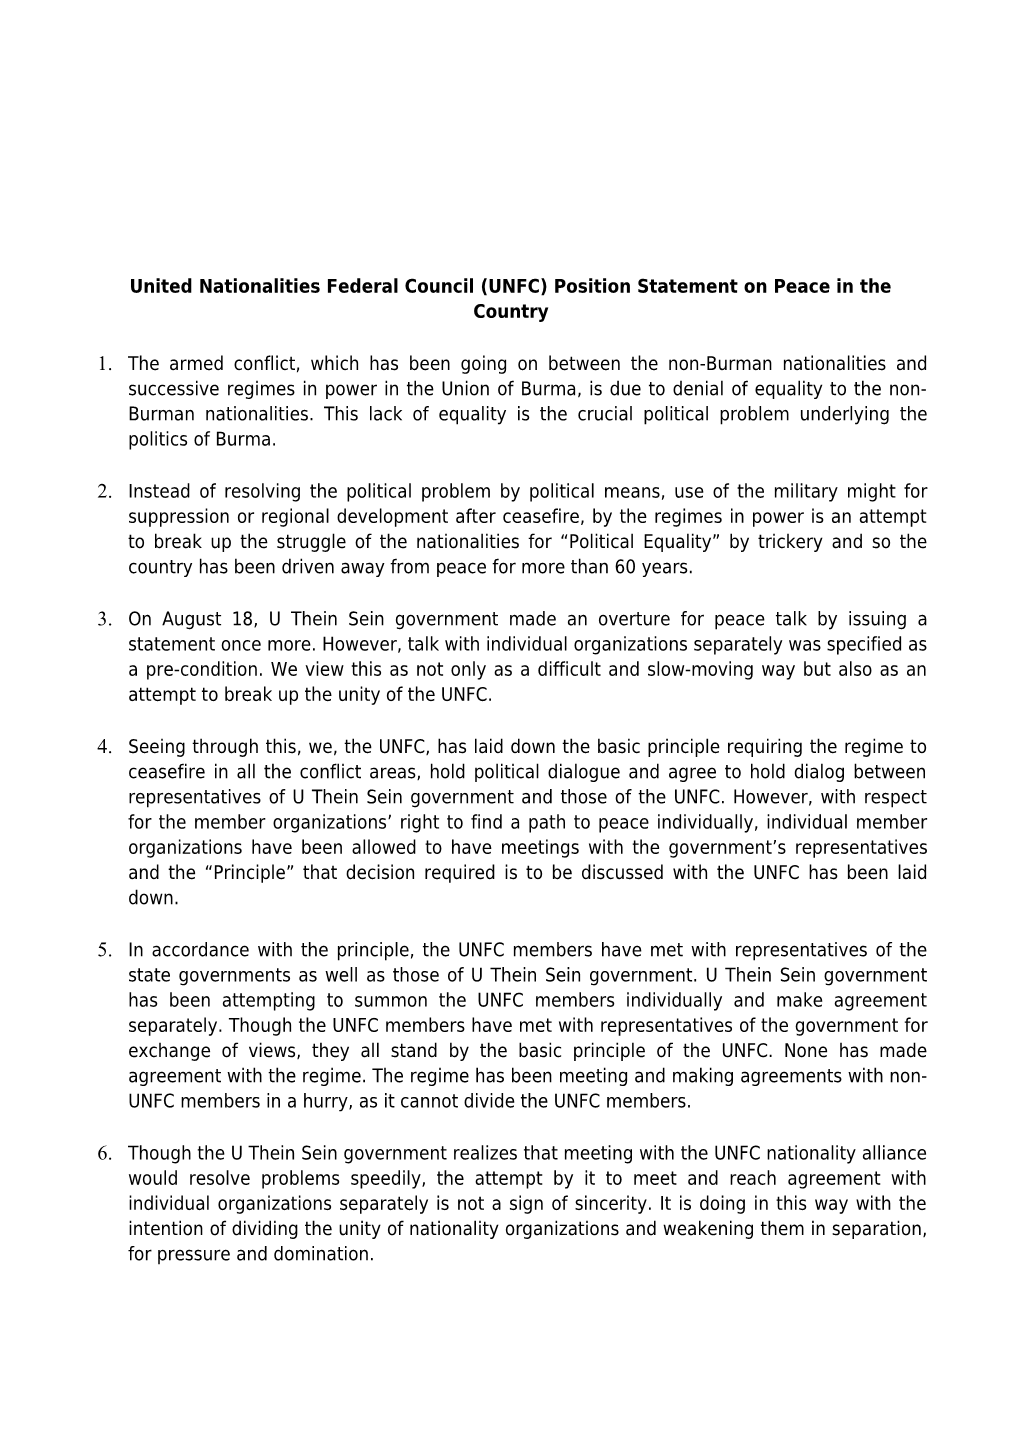 United Nationalities Federal Council (UNFC)Position Statement on Peace in the Country